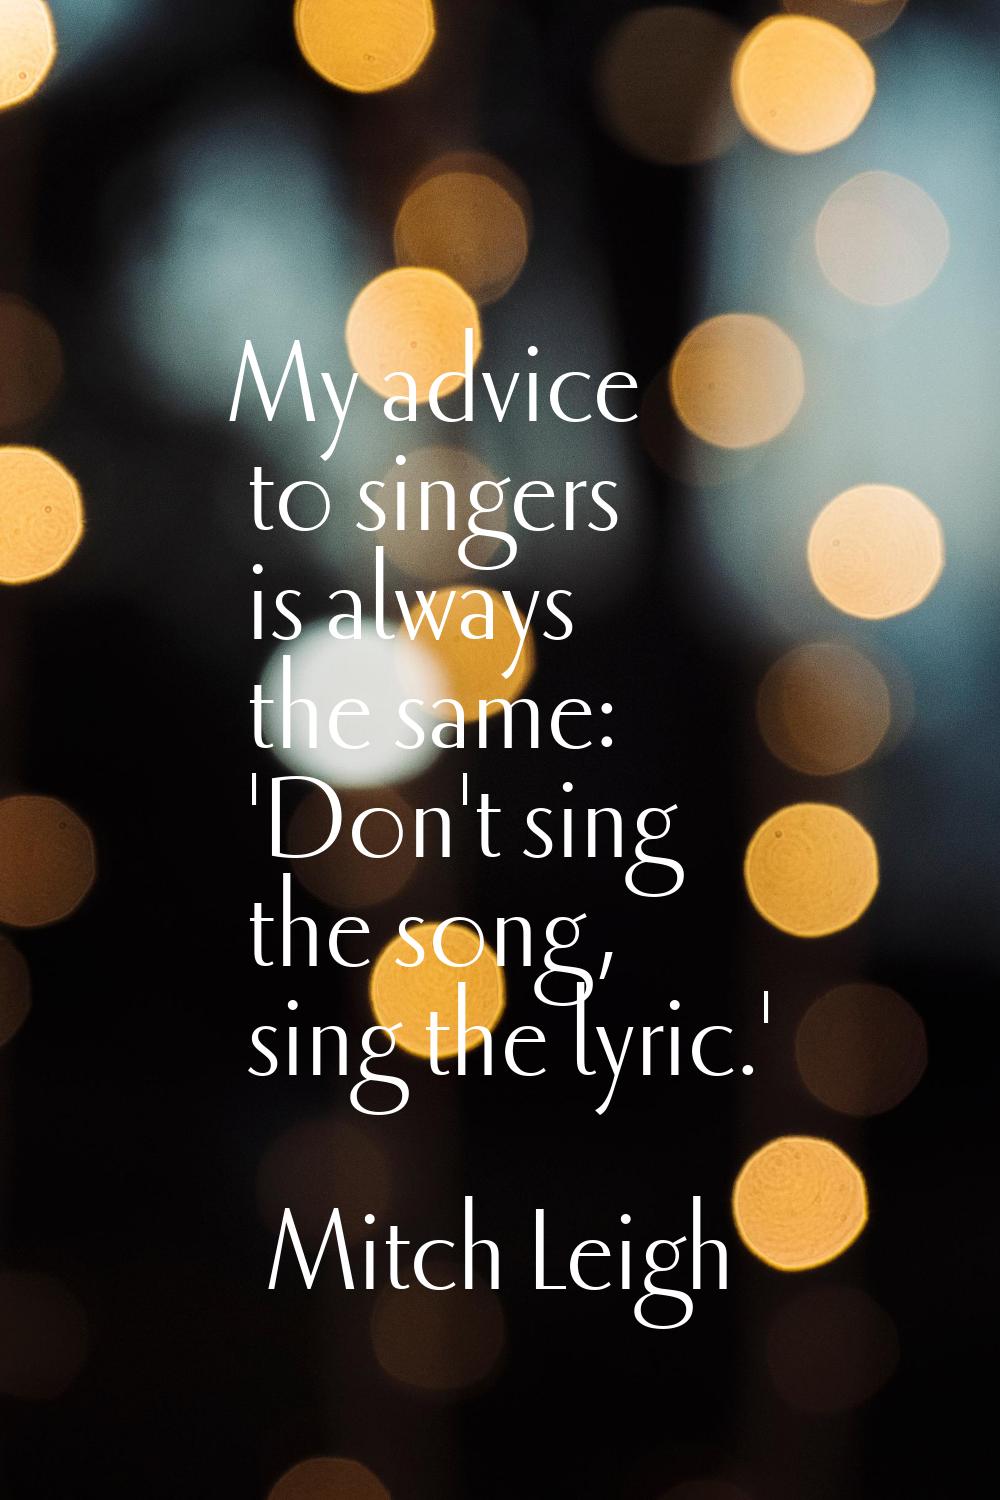 My advice to singers is always the same: 'Don't sing the song, sing the lyric.'